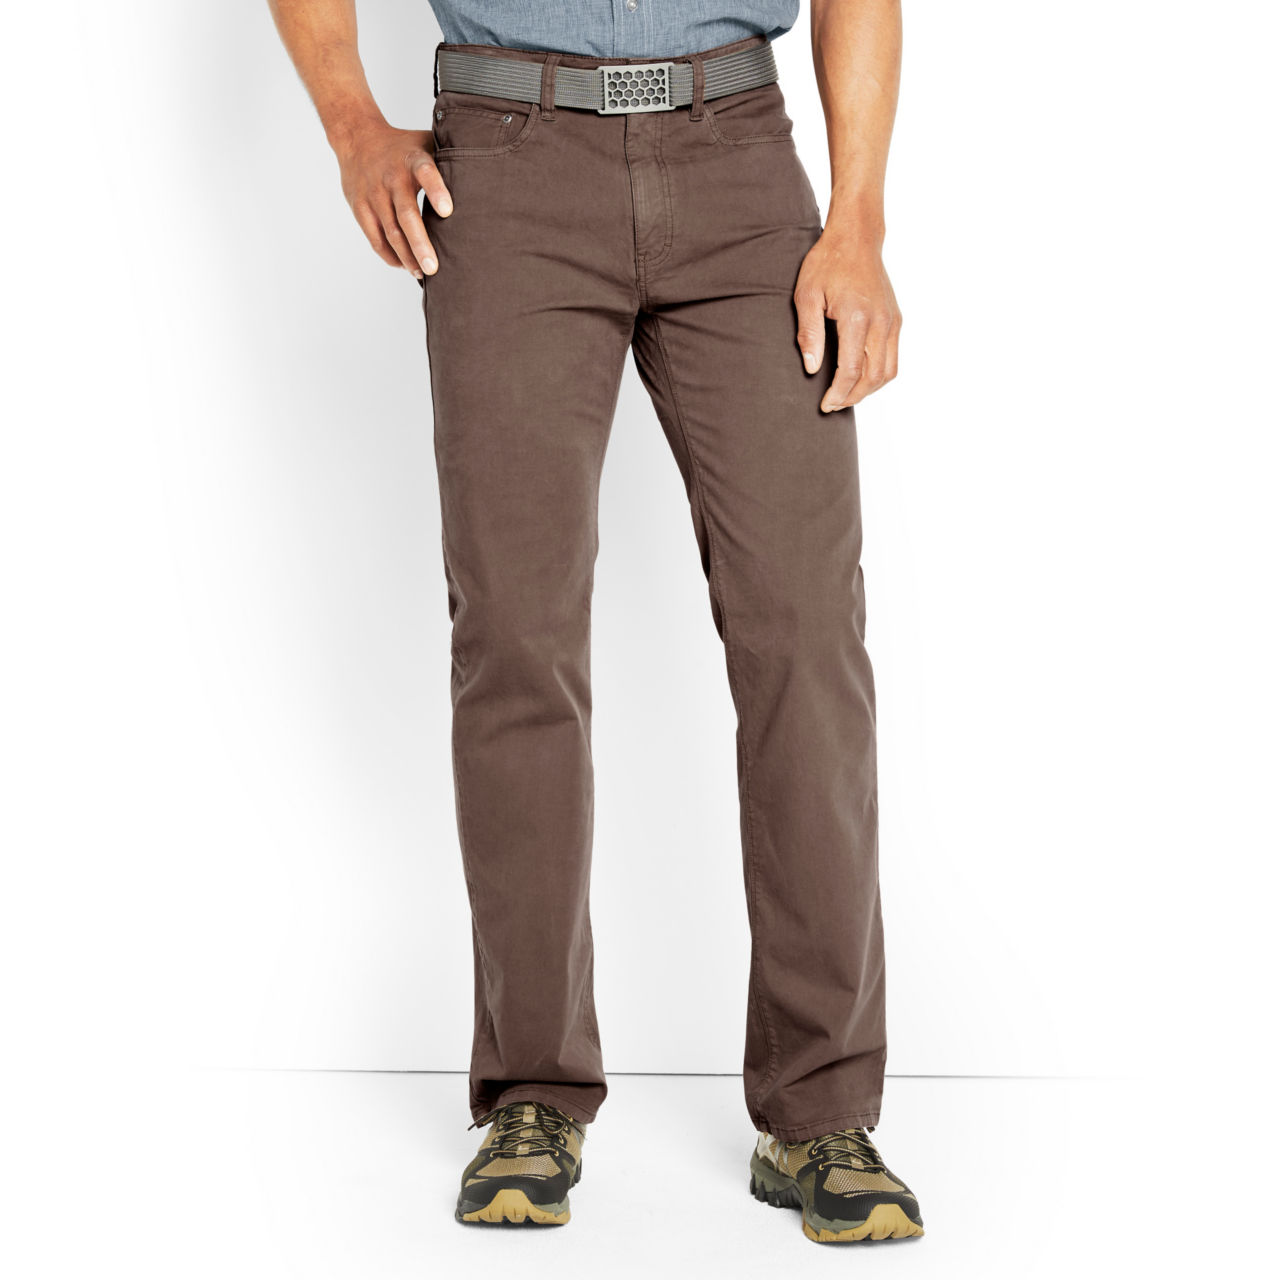 5-Pocket Stretch Twill Pants - CHOCOLATE image number 1